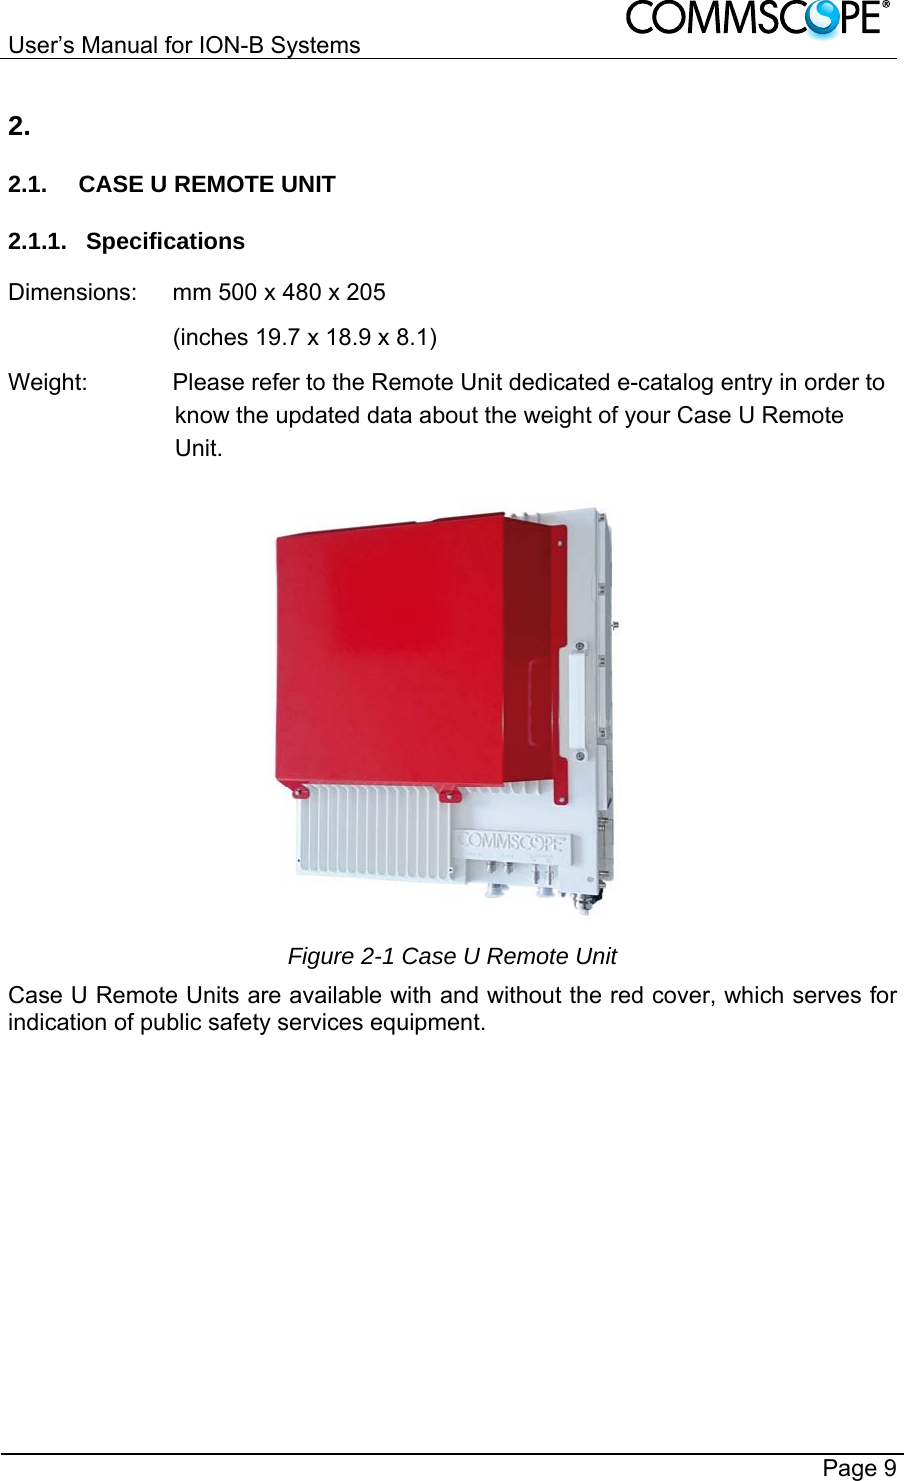 User’s Manual for ION-B Systems       Page 9 2.  2.1.  CASE U REMOTE UNIT 2.1.1. Specifications Dimensions:  mm 500 x 480 x 205    (inches 19.7 x 18.9 x 8.1) Weight:  Please refer to the Remote Unit dedicated e-catalog entry in order to know the updated data about the weight of your Case U Remote Unit.   Figure 2-1 Case U Remote Unit Case U Remote Units are available with and without the red cover, which serves for indication of public safety services equipment. 